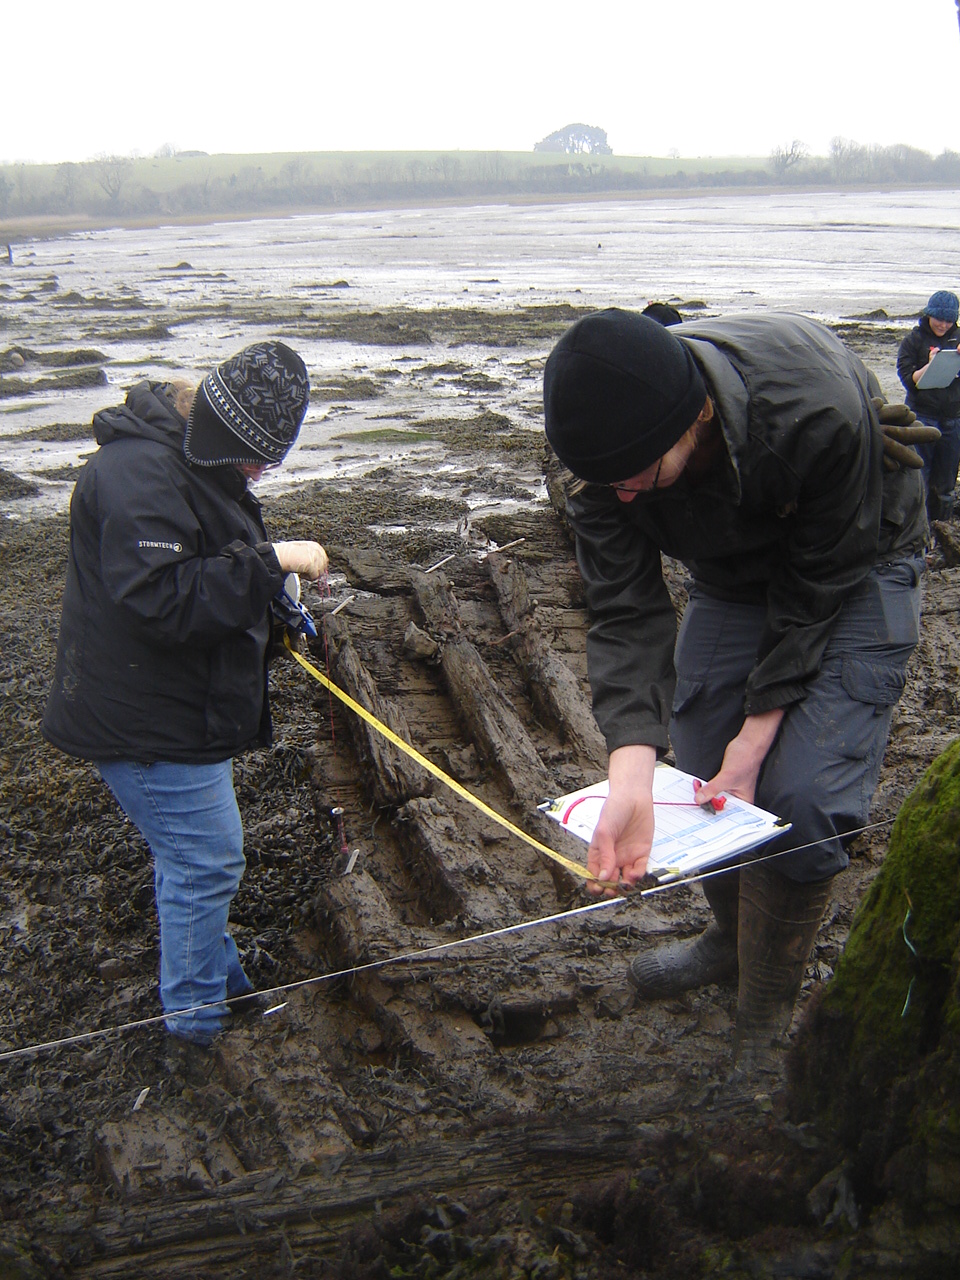 Offset Surveying at an Intertidal Site at Lawrenny in Pembrokeshire